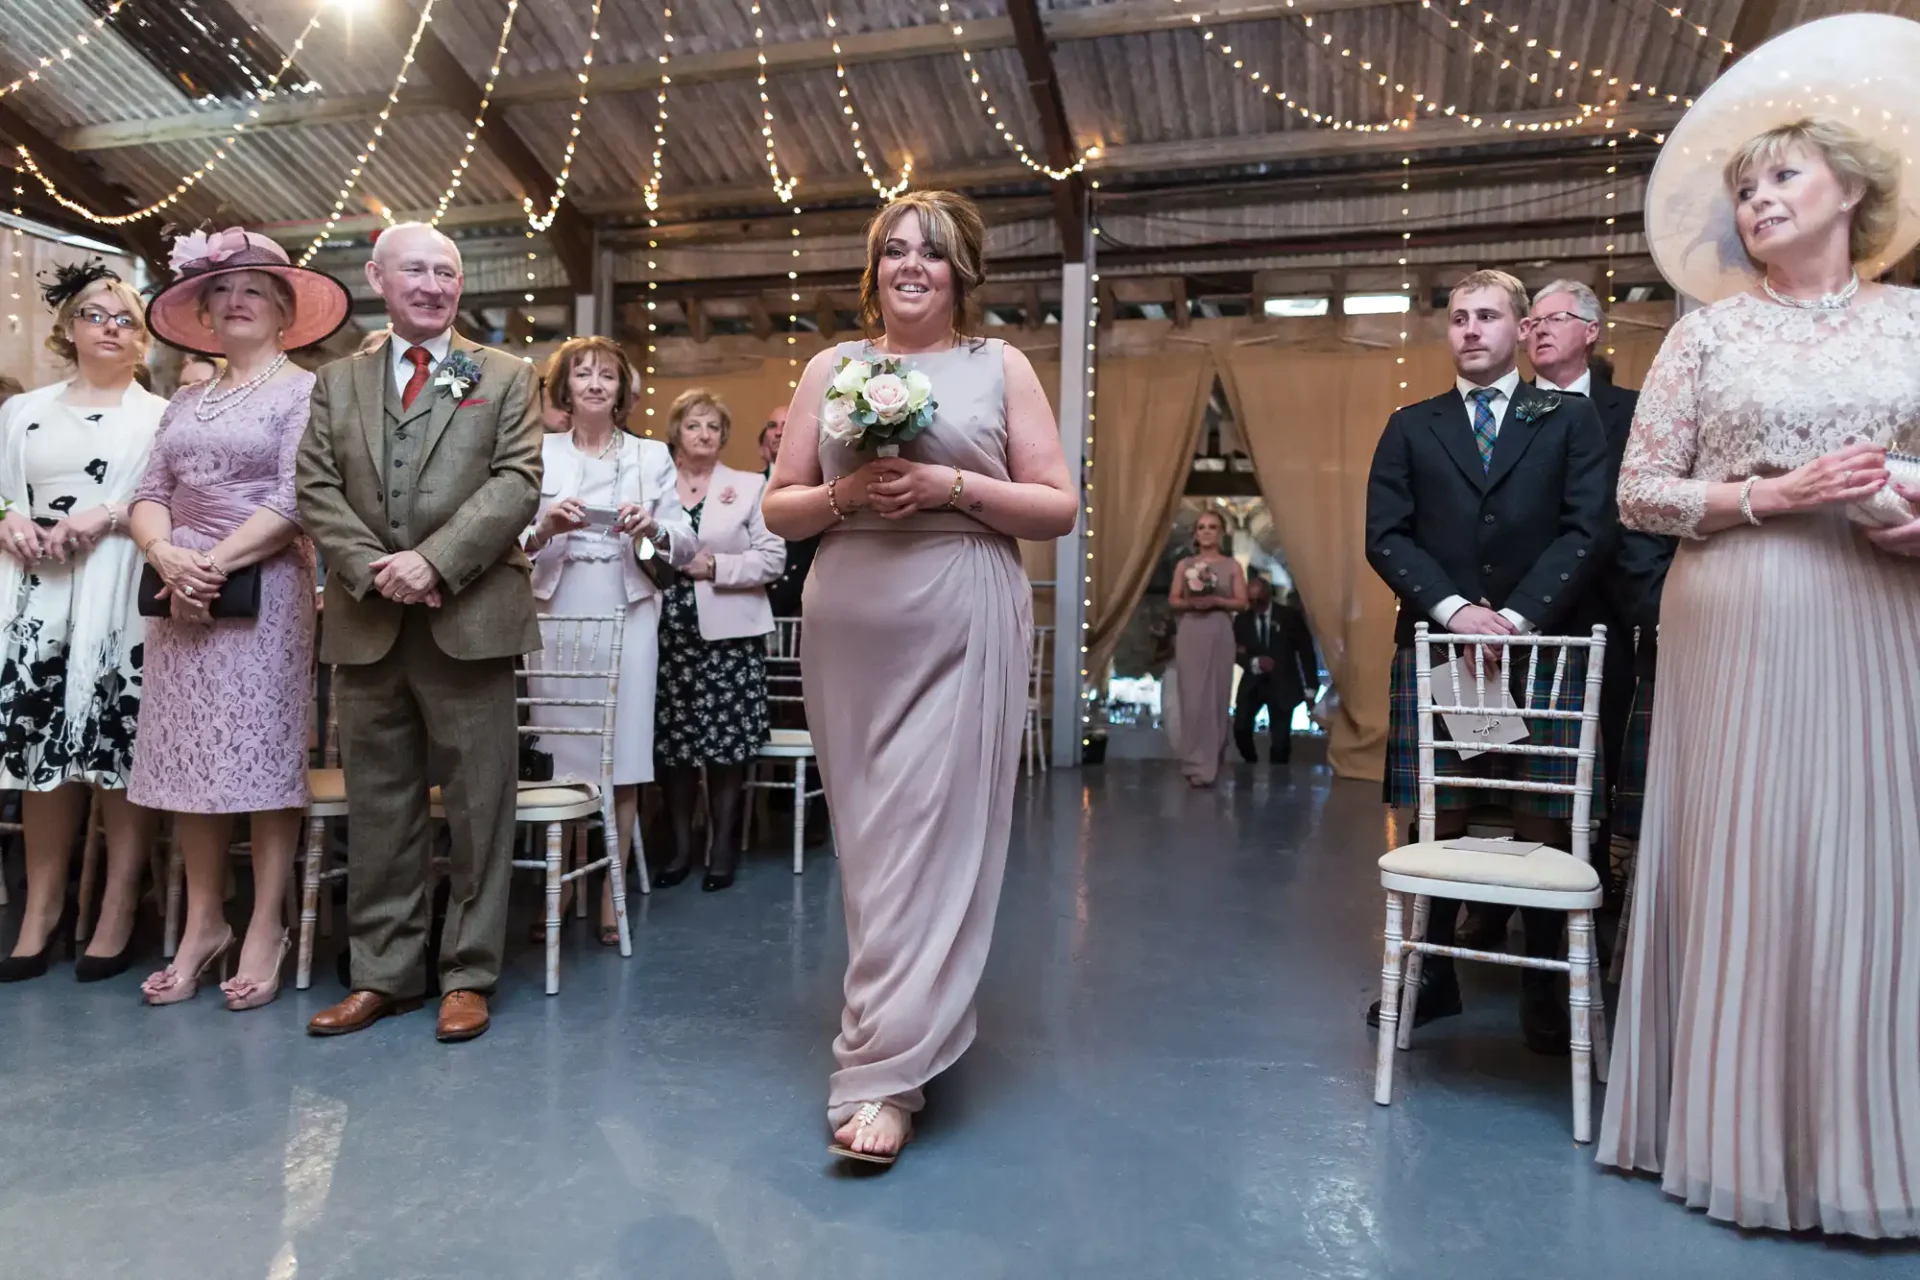 A bride walks down the aisle, smiling and holding a bouquet, as guests dressed in formal attire watch in a rustic, barn-like venue.